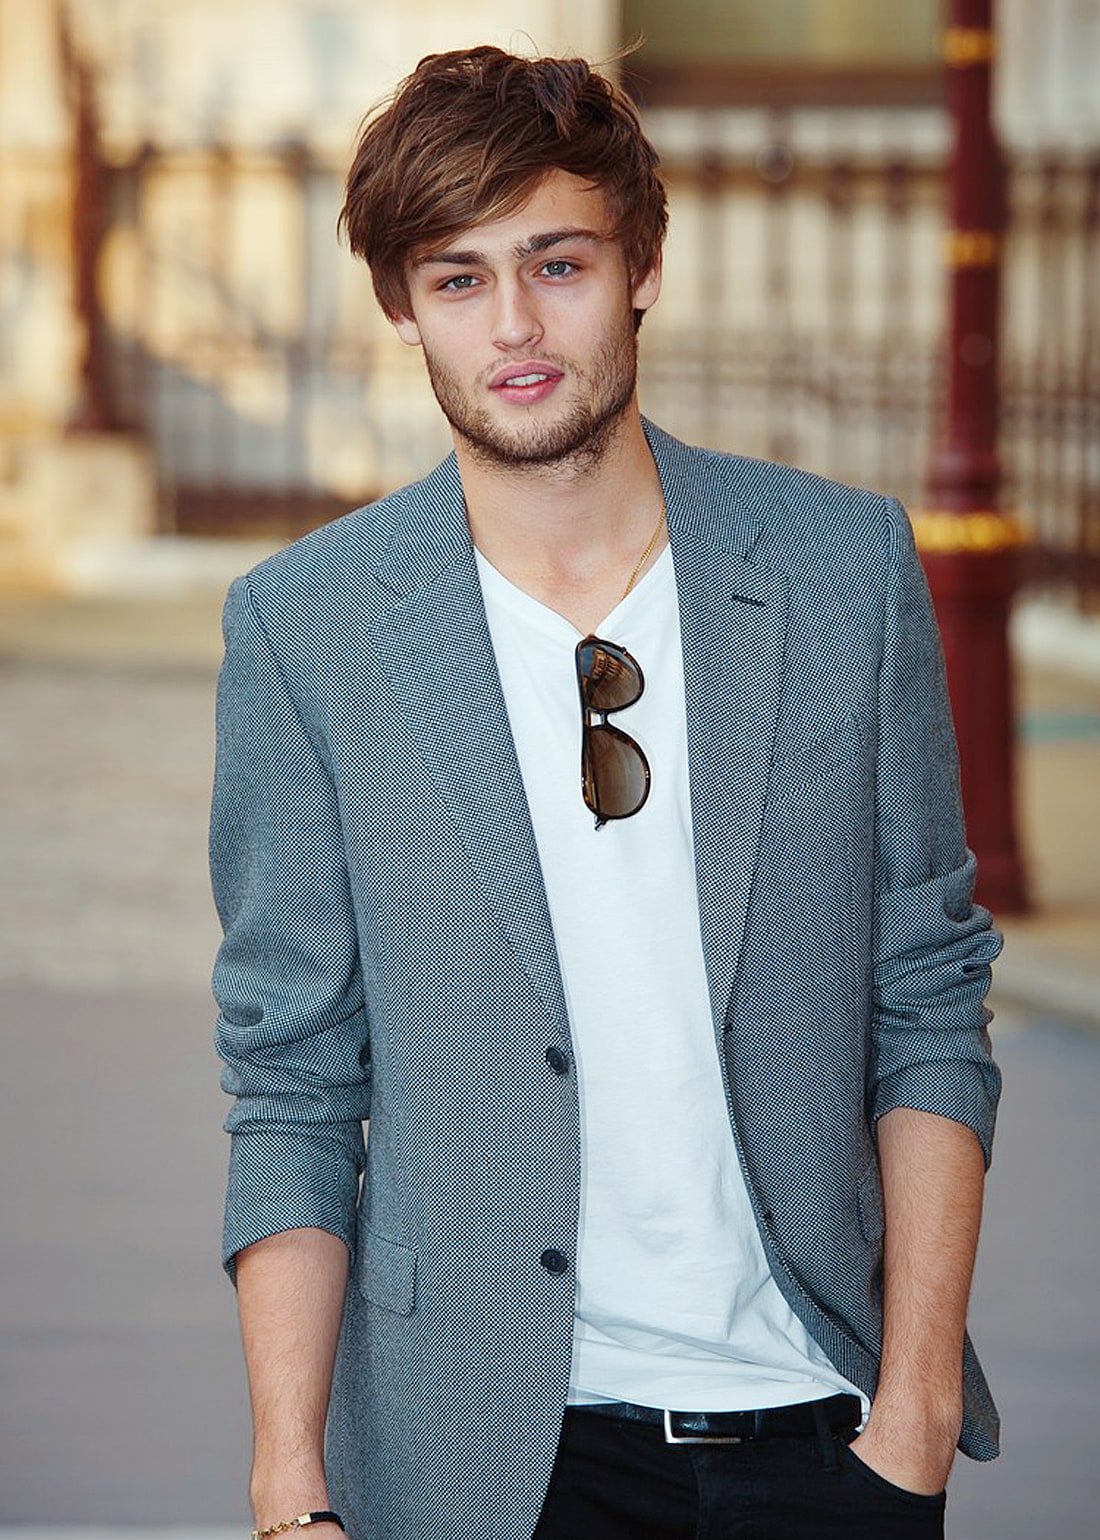 Picture of Douglas Booth